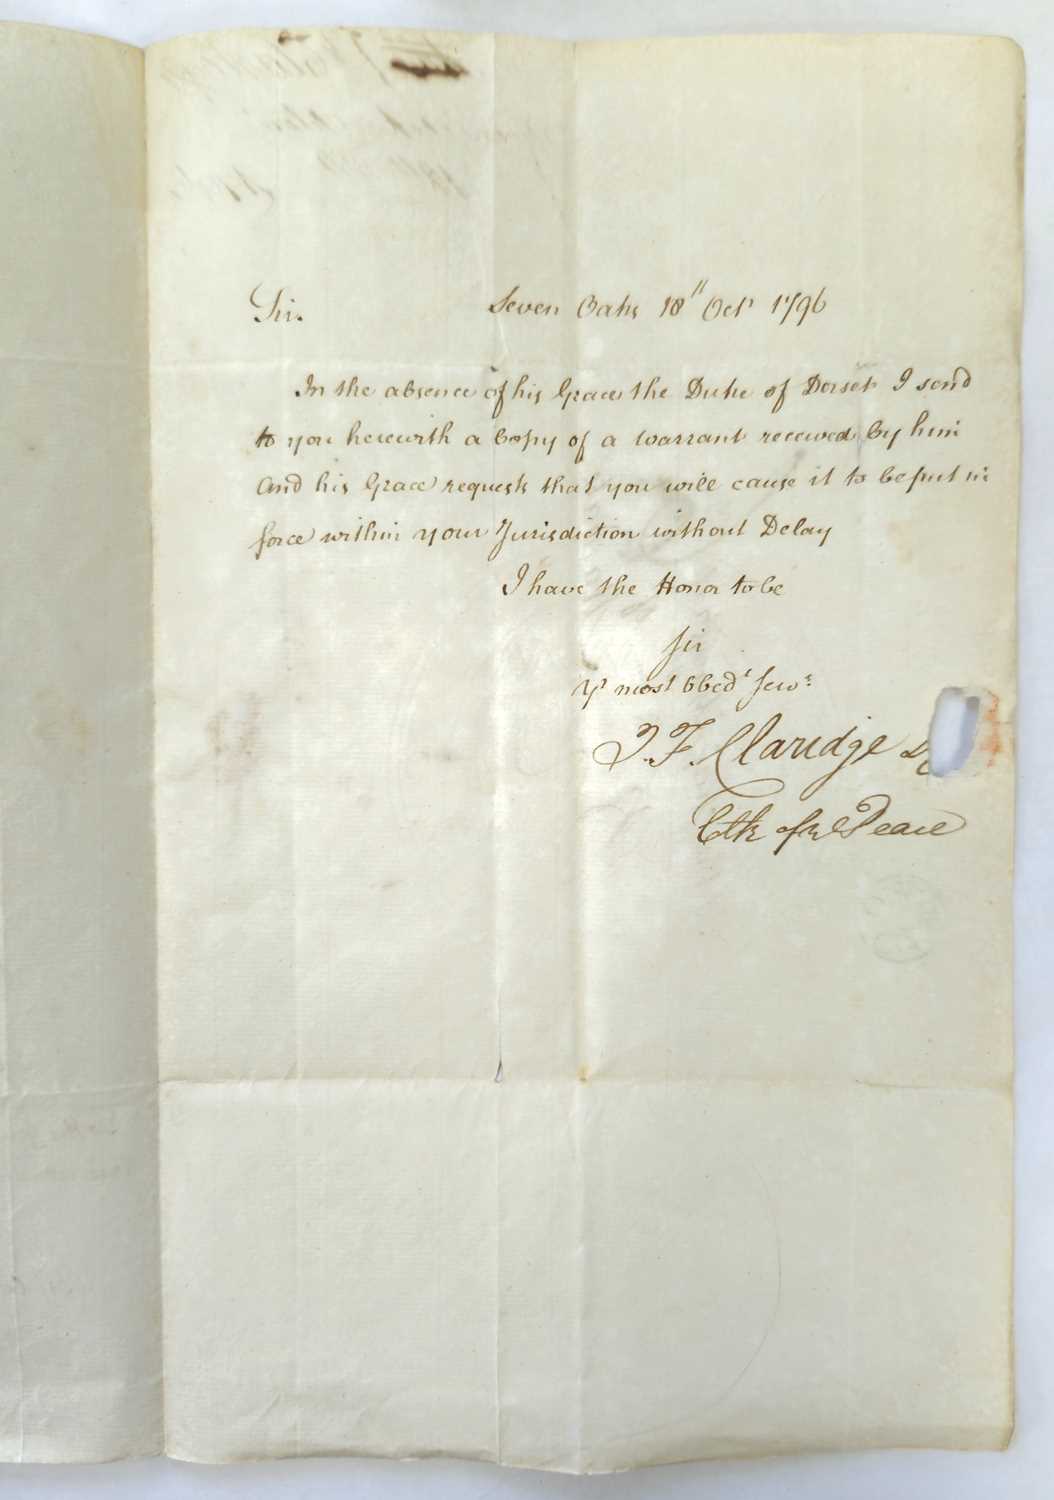 An Order to the Chief Magistrate of Margate forbidding any British ships to sail to Genoa, 1796 - Image 2 of 3